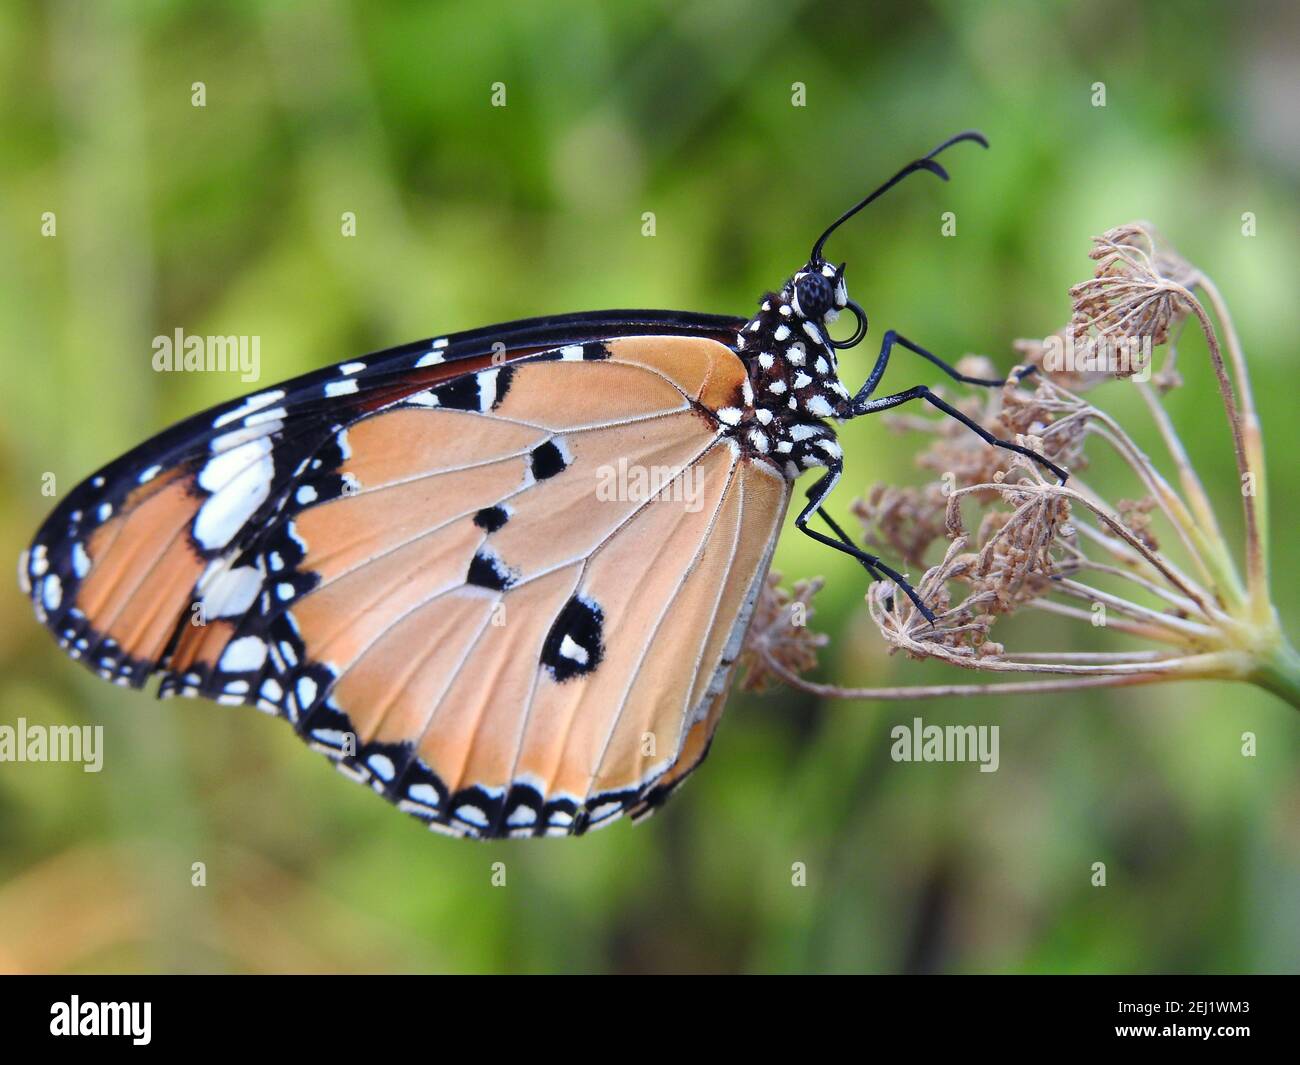 a close up view of a butterfly, Danaus chrysippus butterfly also known as plain tiger, African queen, or African Monarch consumes a plant Stock Photo